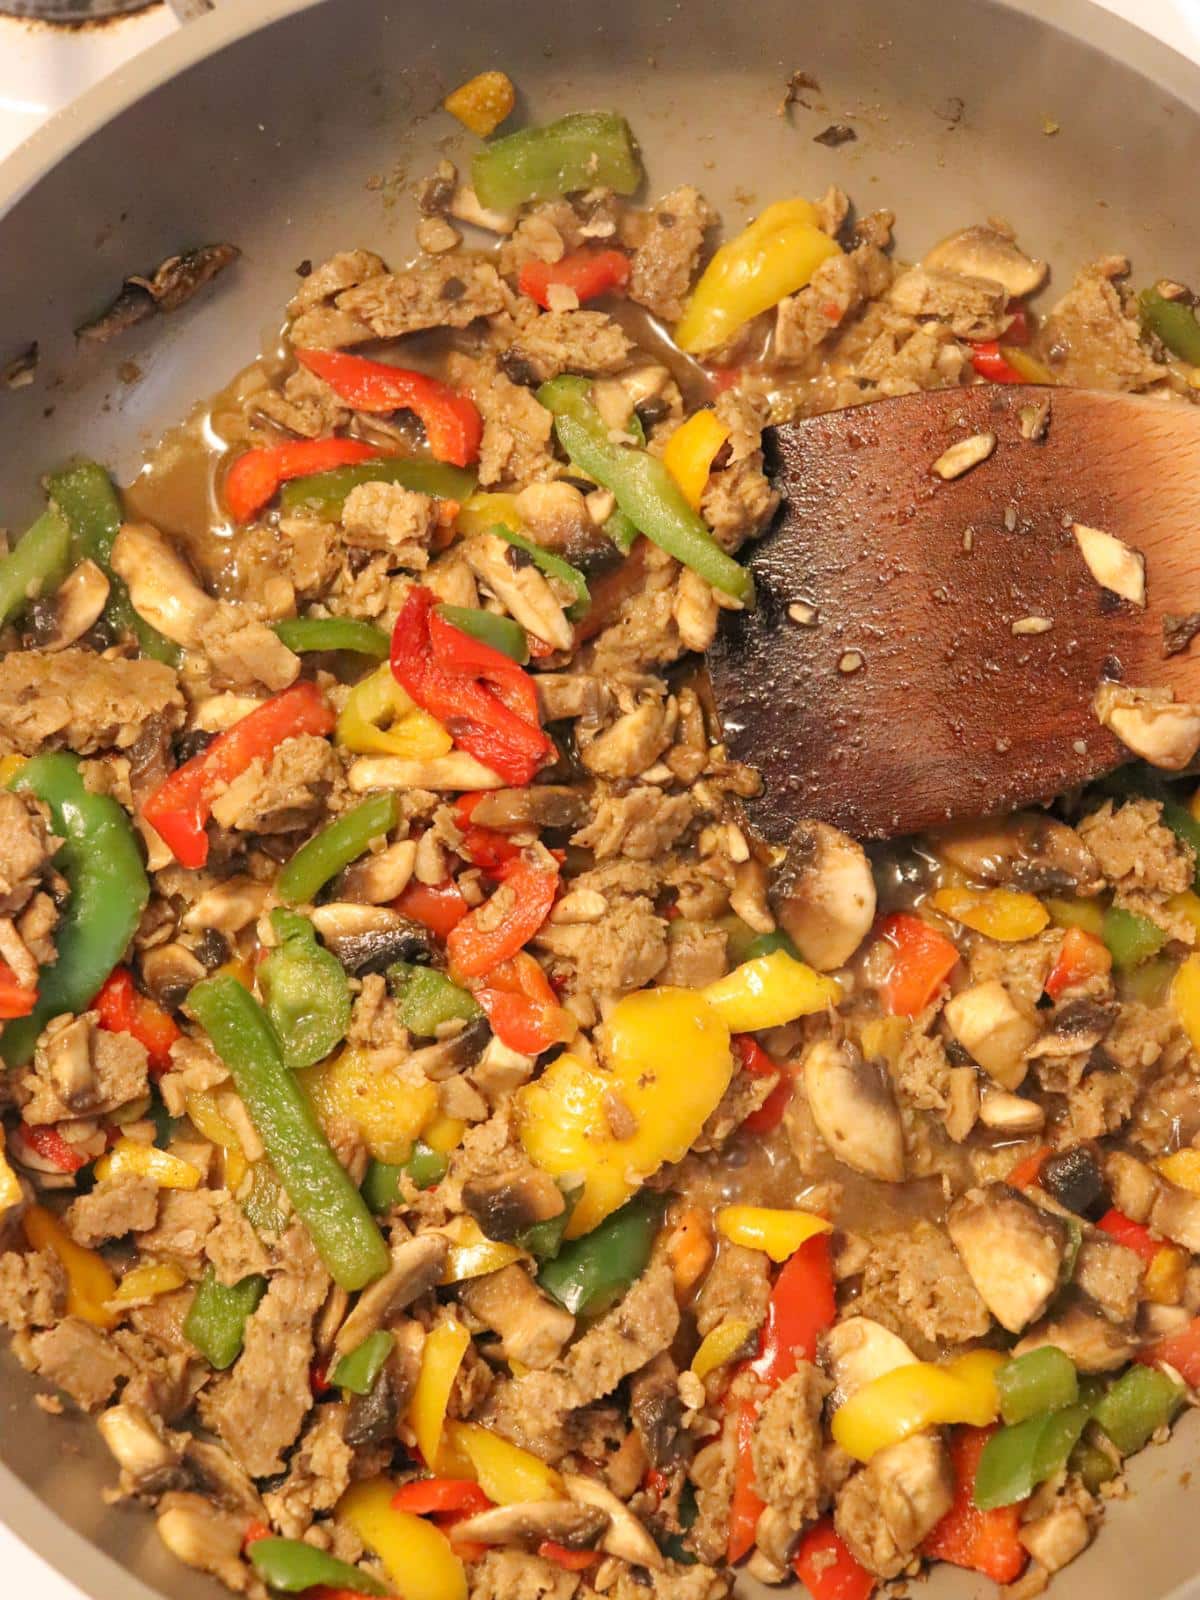 Vegan breakfast sausage, bell peppers and onions sautéing in a frying pan on the stove.